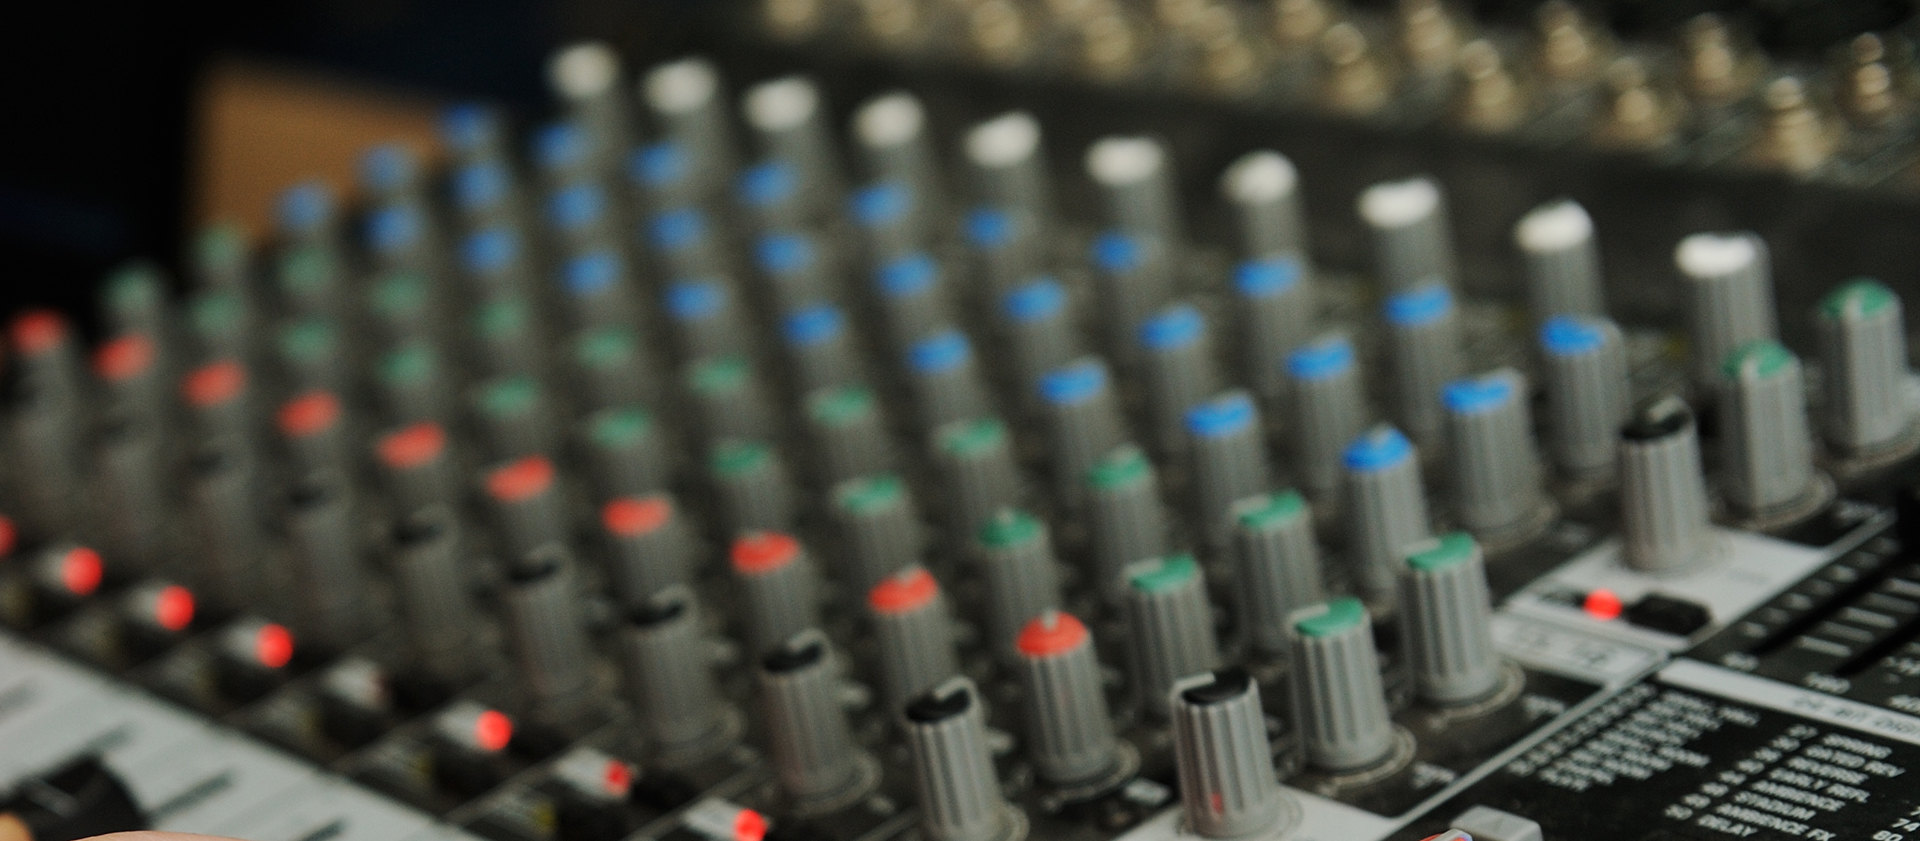 Picture shows audio mixing desk buttons 